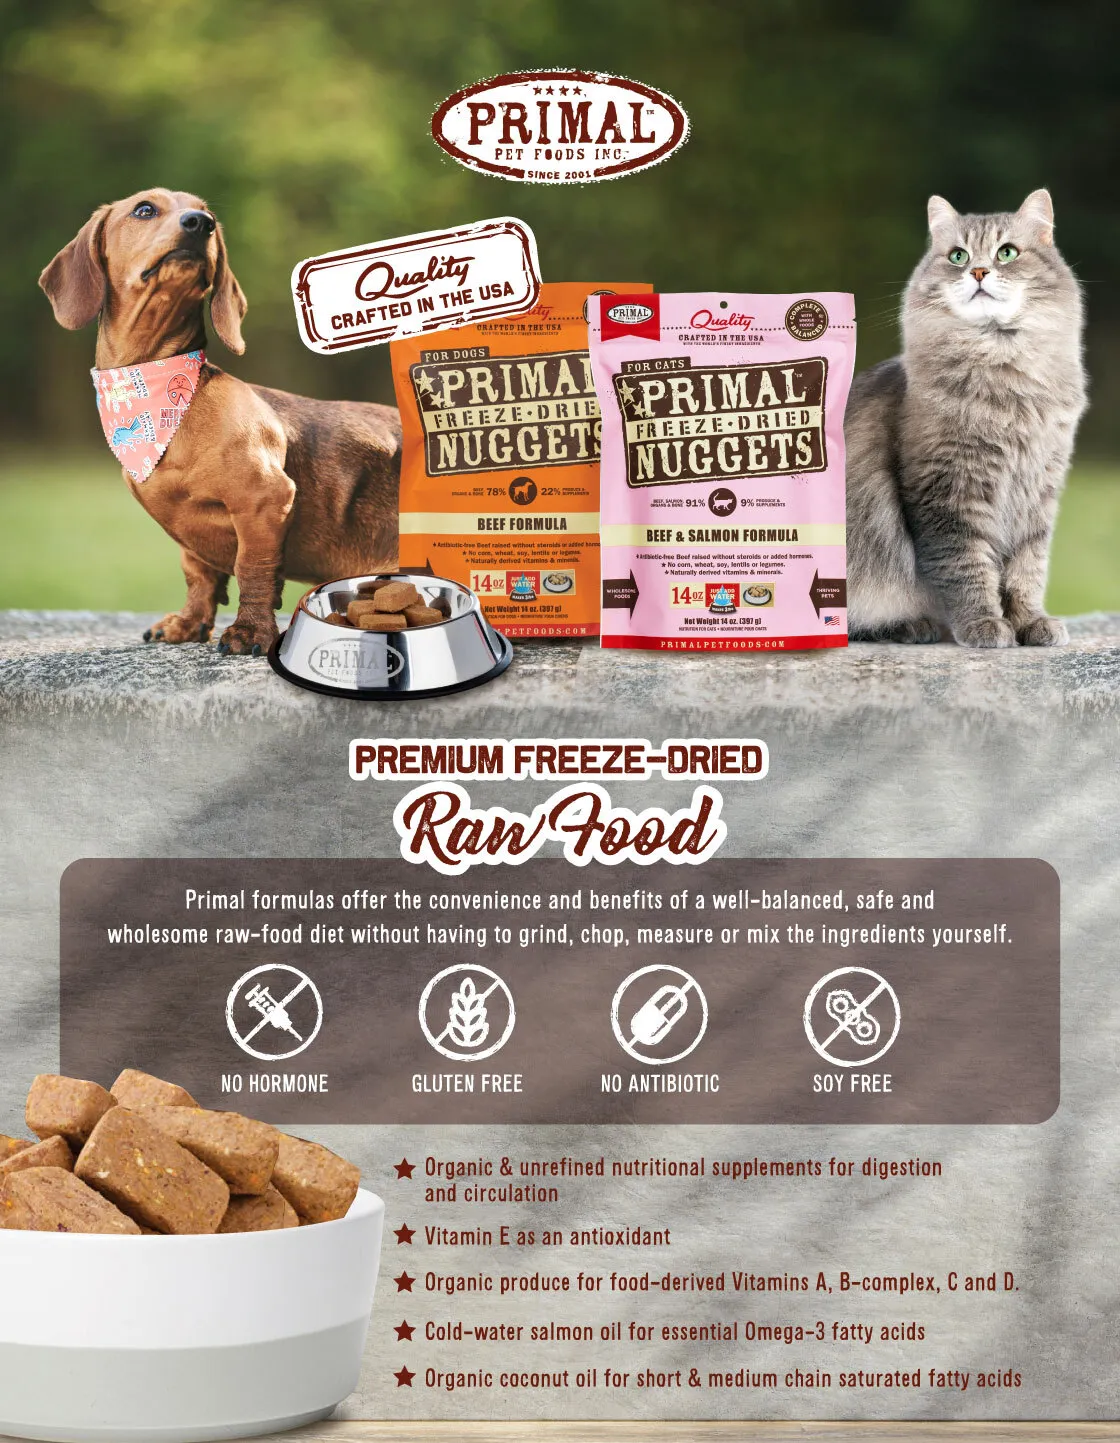 is primal dog food good for puppies